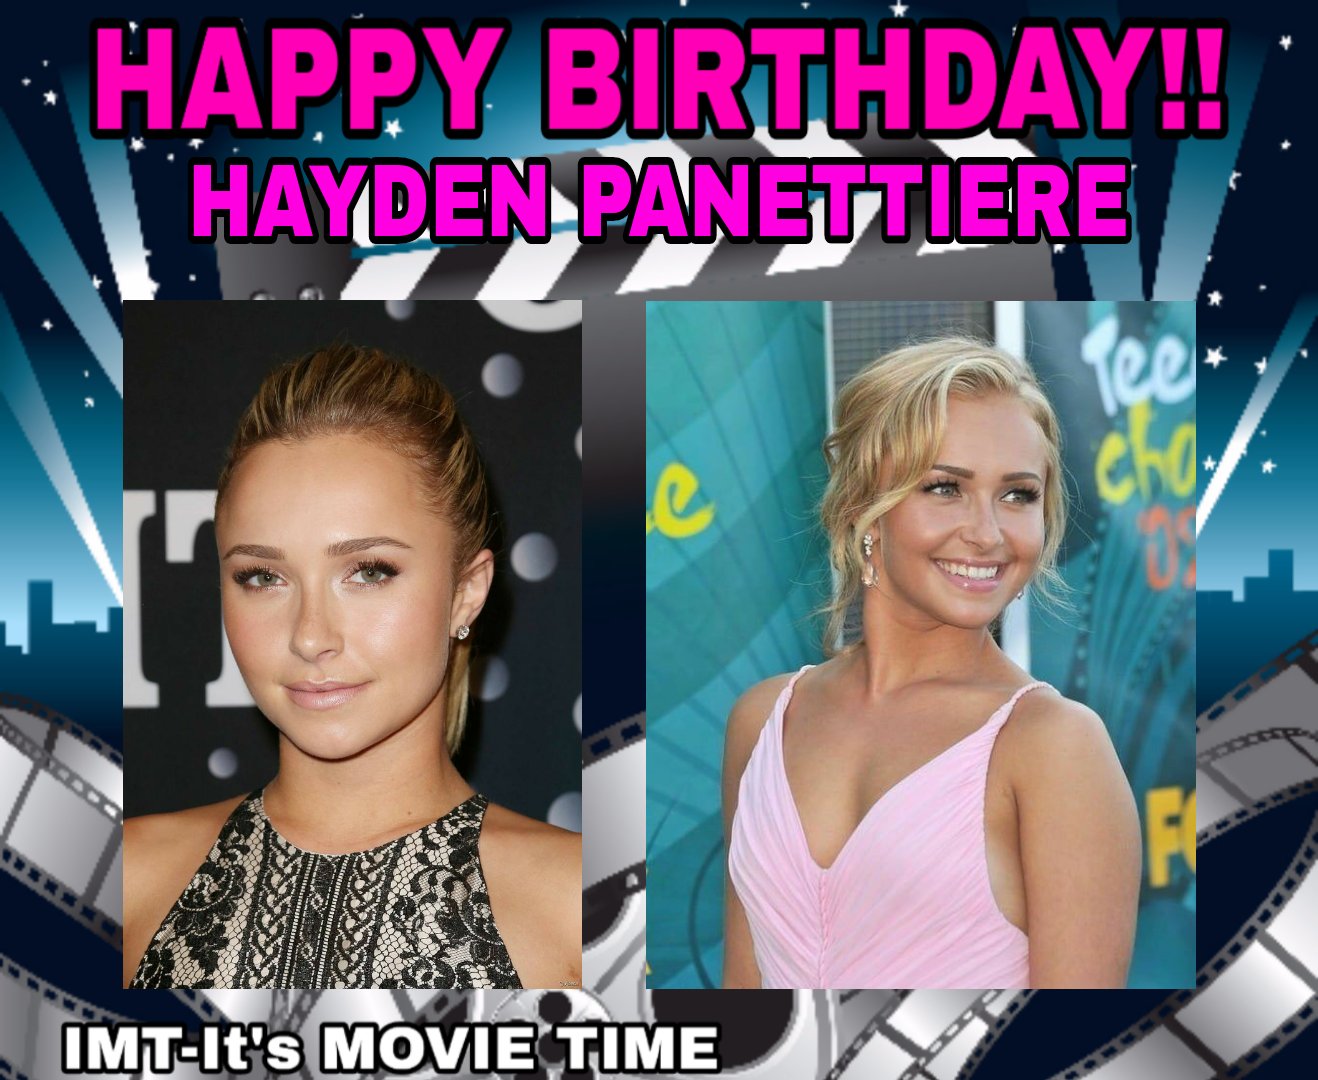 Happy Birthday to the Beautiful Hayden Panettiere! The actress is celebrating 31 years. 